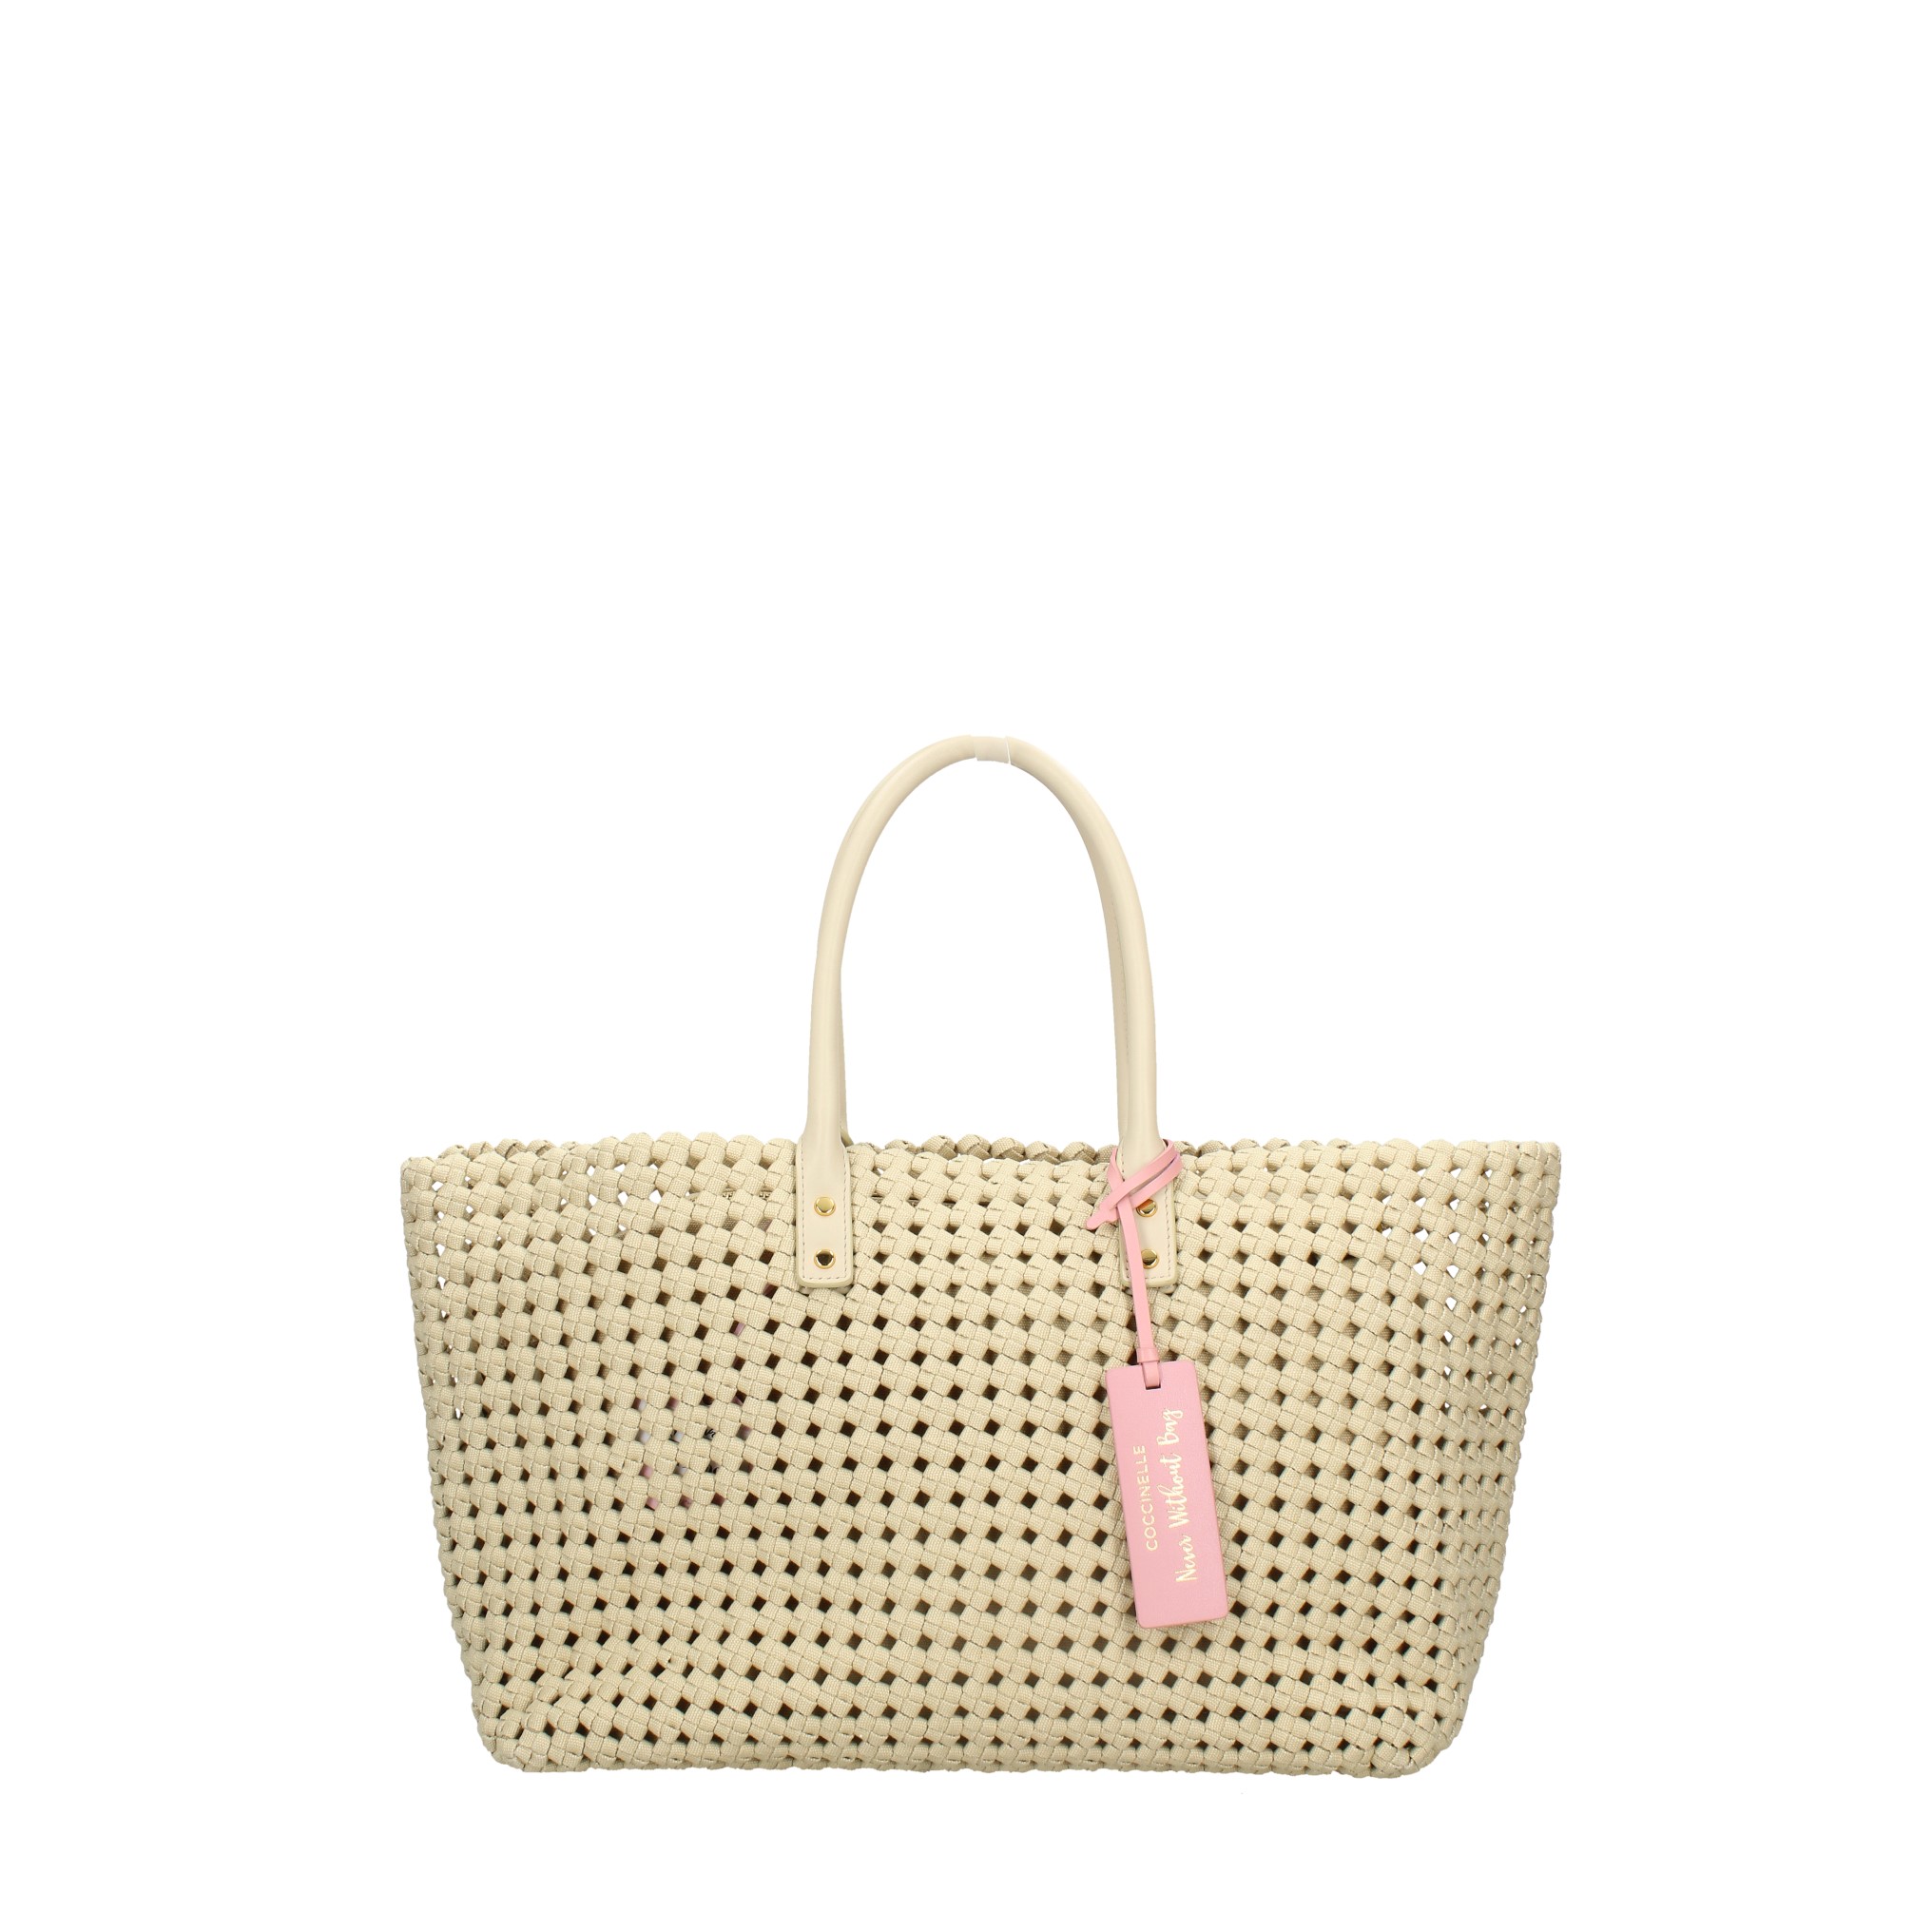 Fabric and leather shopper - COCCINELLE - Ginevra calzature